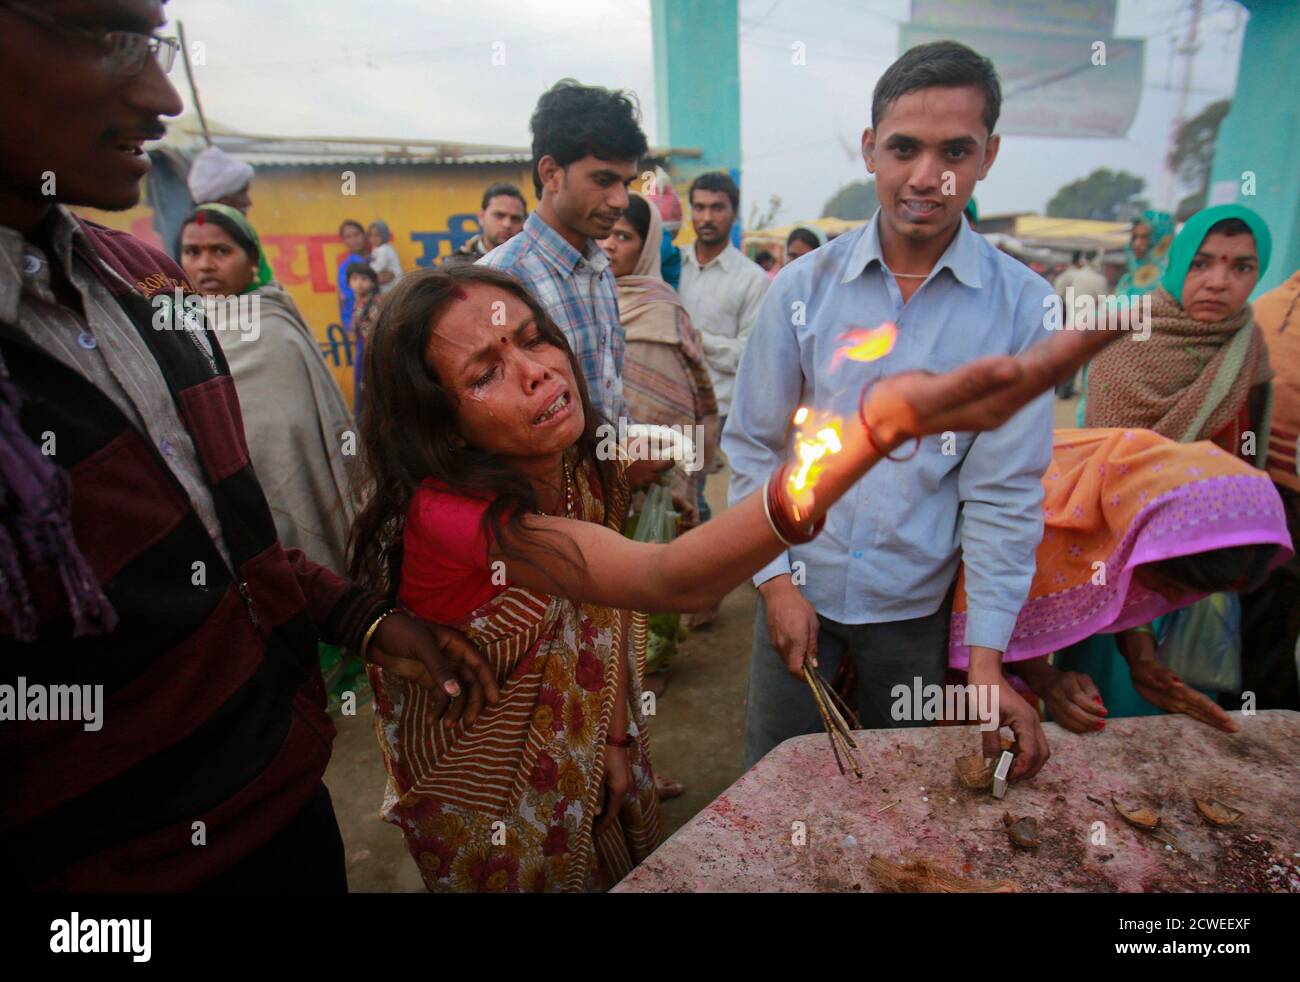 A devotee, believed to be possessed by evil spirits, cries as she performs a fire ritual on the sacred platform at Guru Deoji Maharaj temple during a ghost fair at Malajpur village in Betul district in the central Indian state of Madhya Pradesh January 27, 2013. People from across India come to this fair to be exorcised of ‘evil spirits’. They are usually brought by relatives and they are most often women. The exorcism involves running around the temple courtyard to make the 'ghost' weak then being beaten by a priest with a broom. Picture taken January 27, 2013. REUTERS/Danish Siddiqui (INDIA  Stock Photo